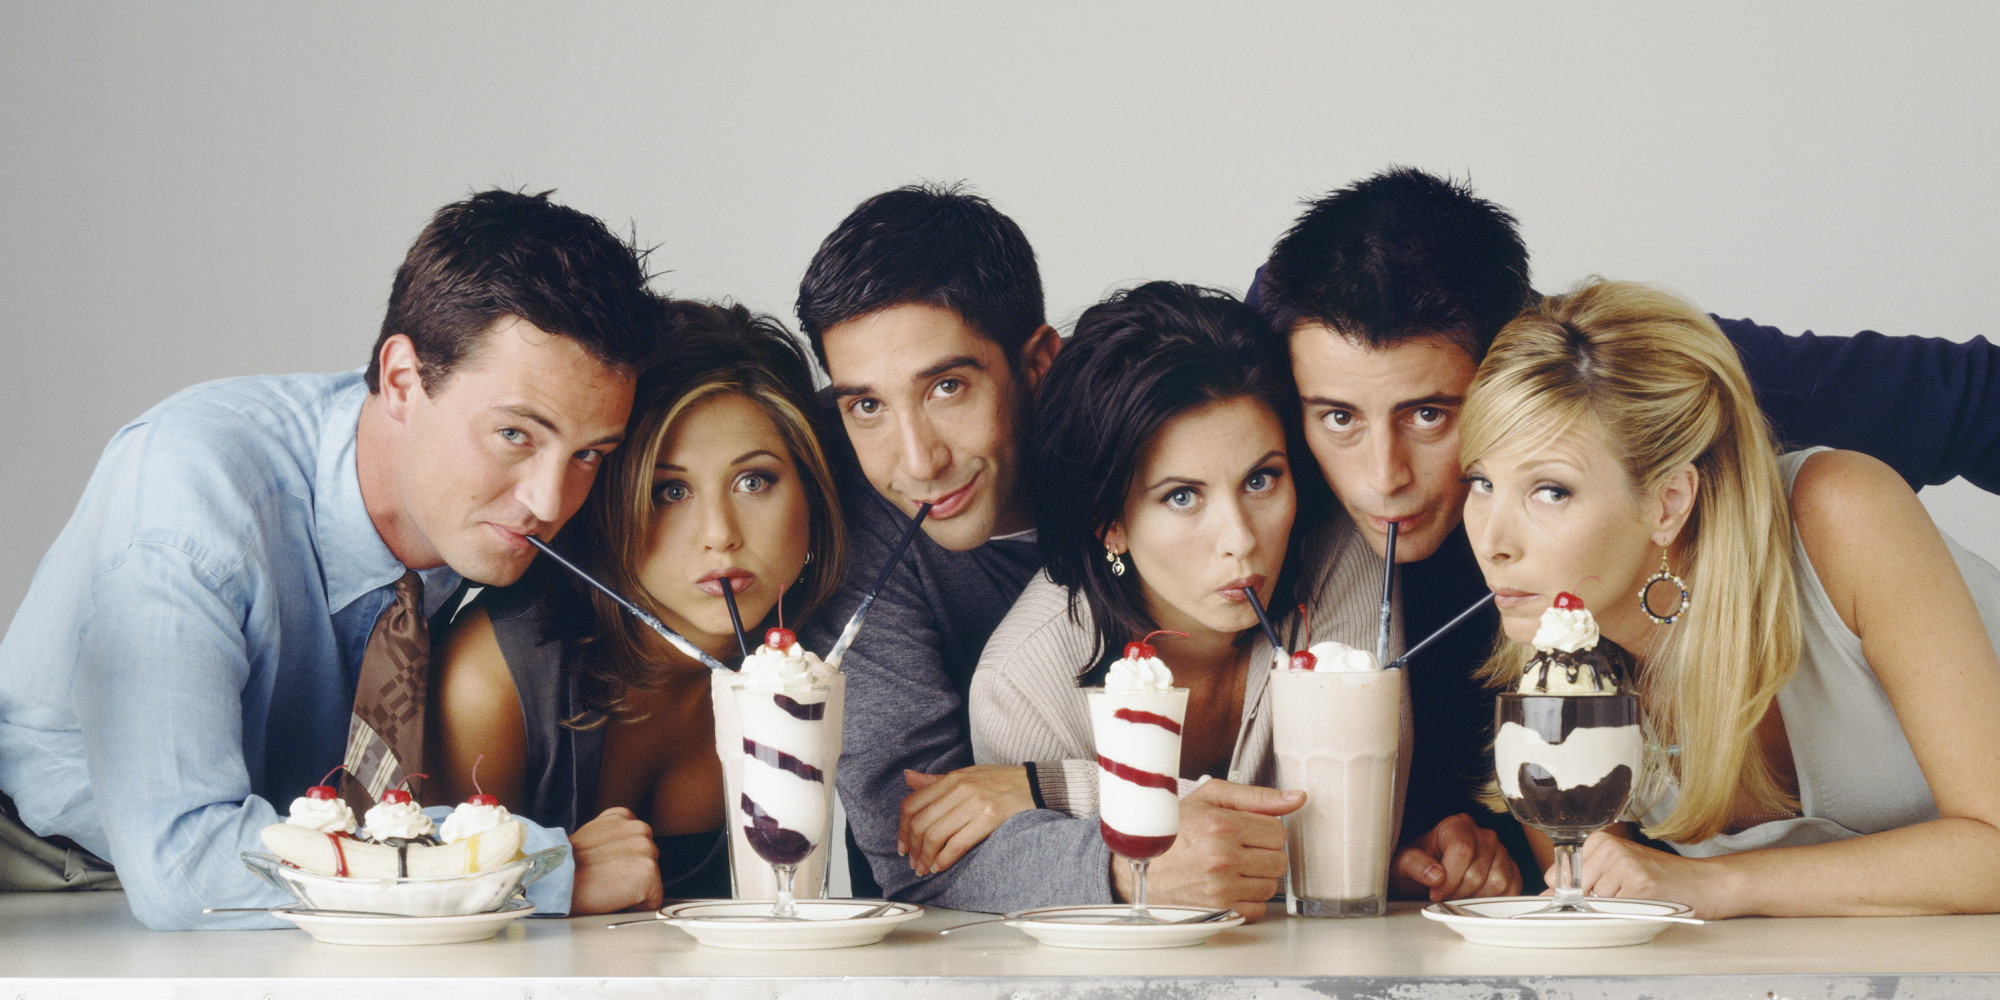 Sharing: How a TV Sitcom Triggered the Downfall of Western Civilization